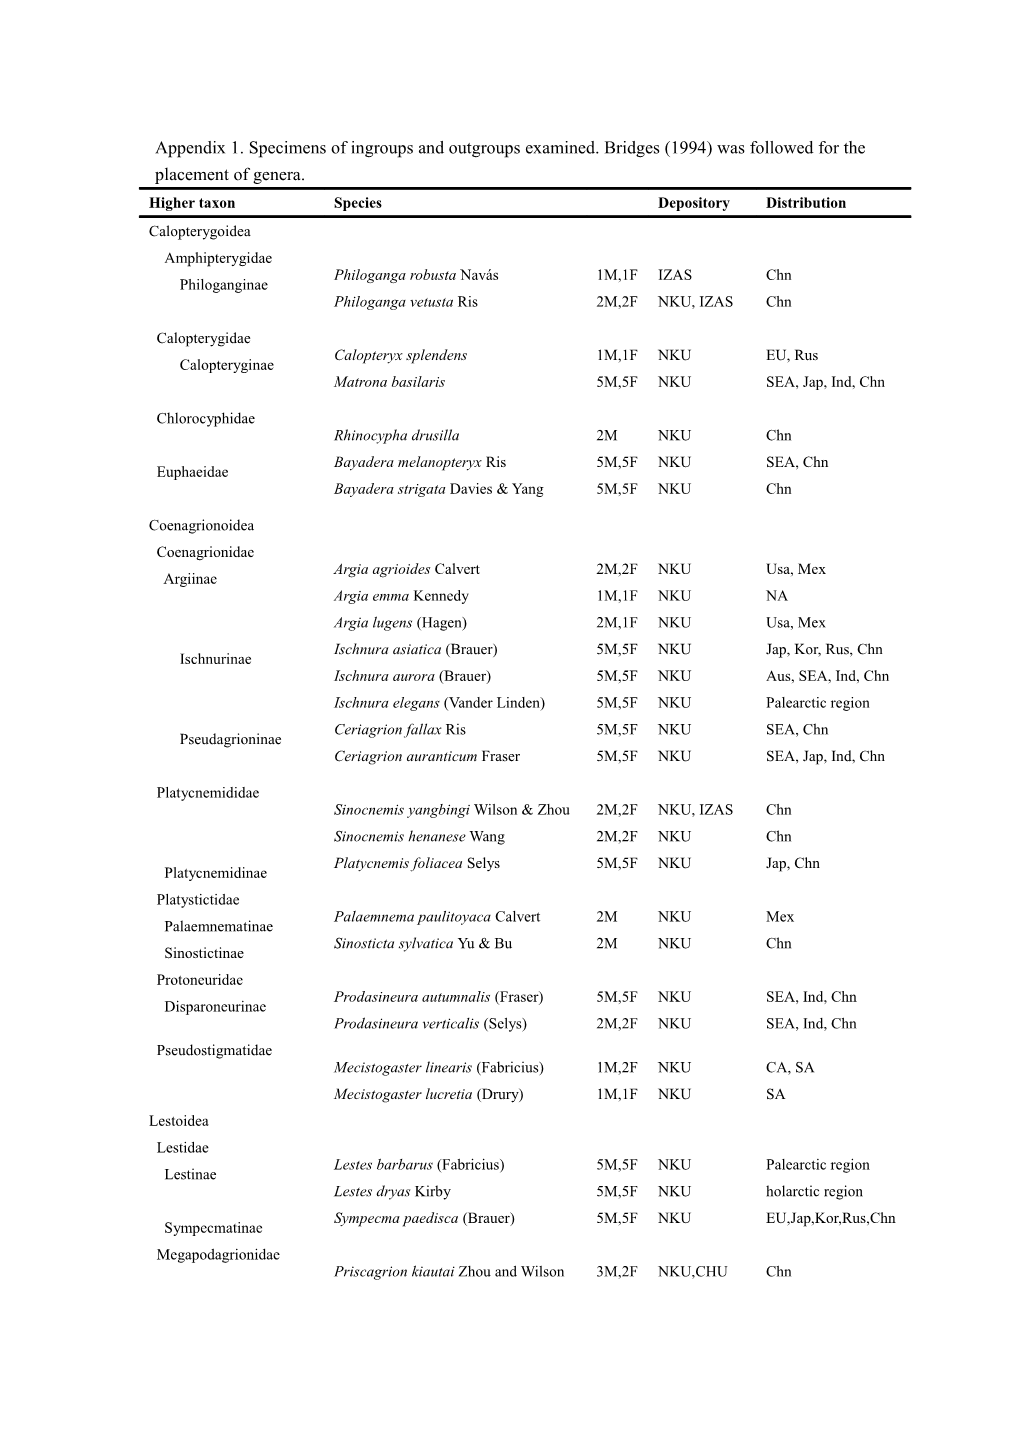 Appendix 1. Specimens of Ingroups and Outgroupsexamined. Bridges (1994) Was Followed For